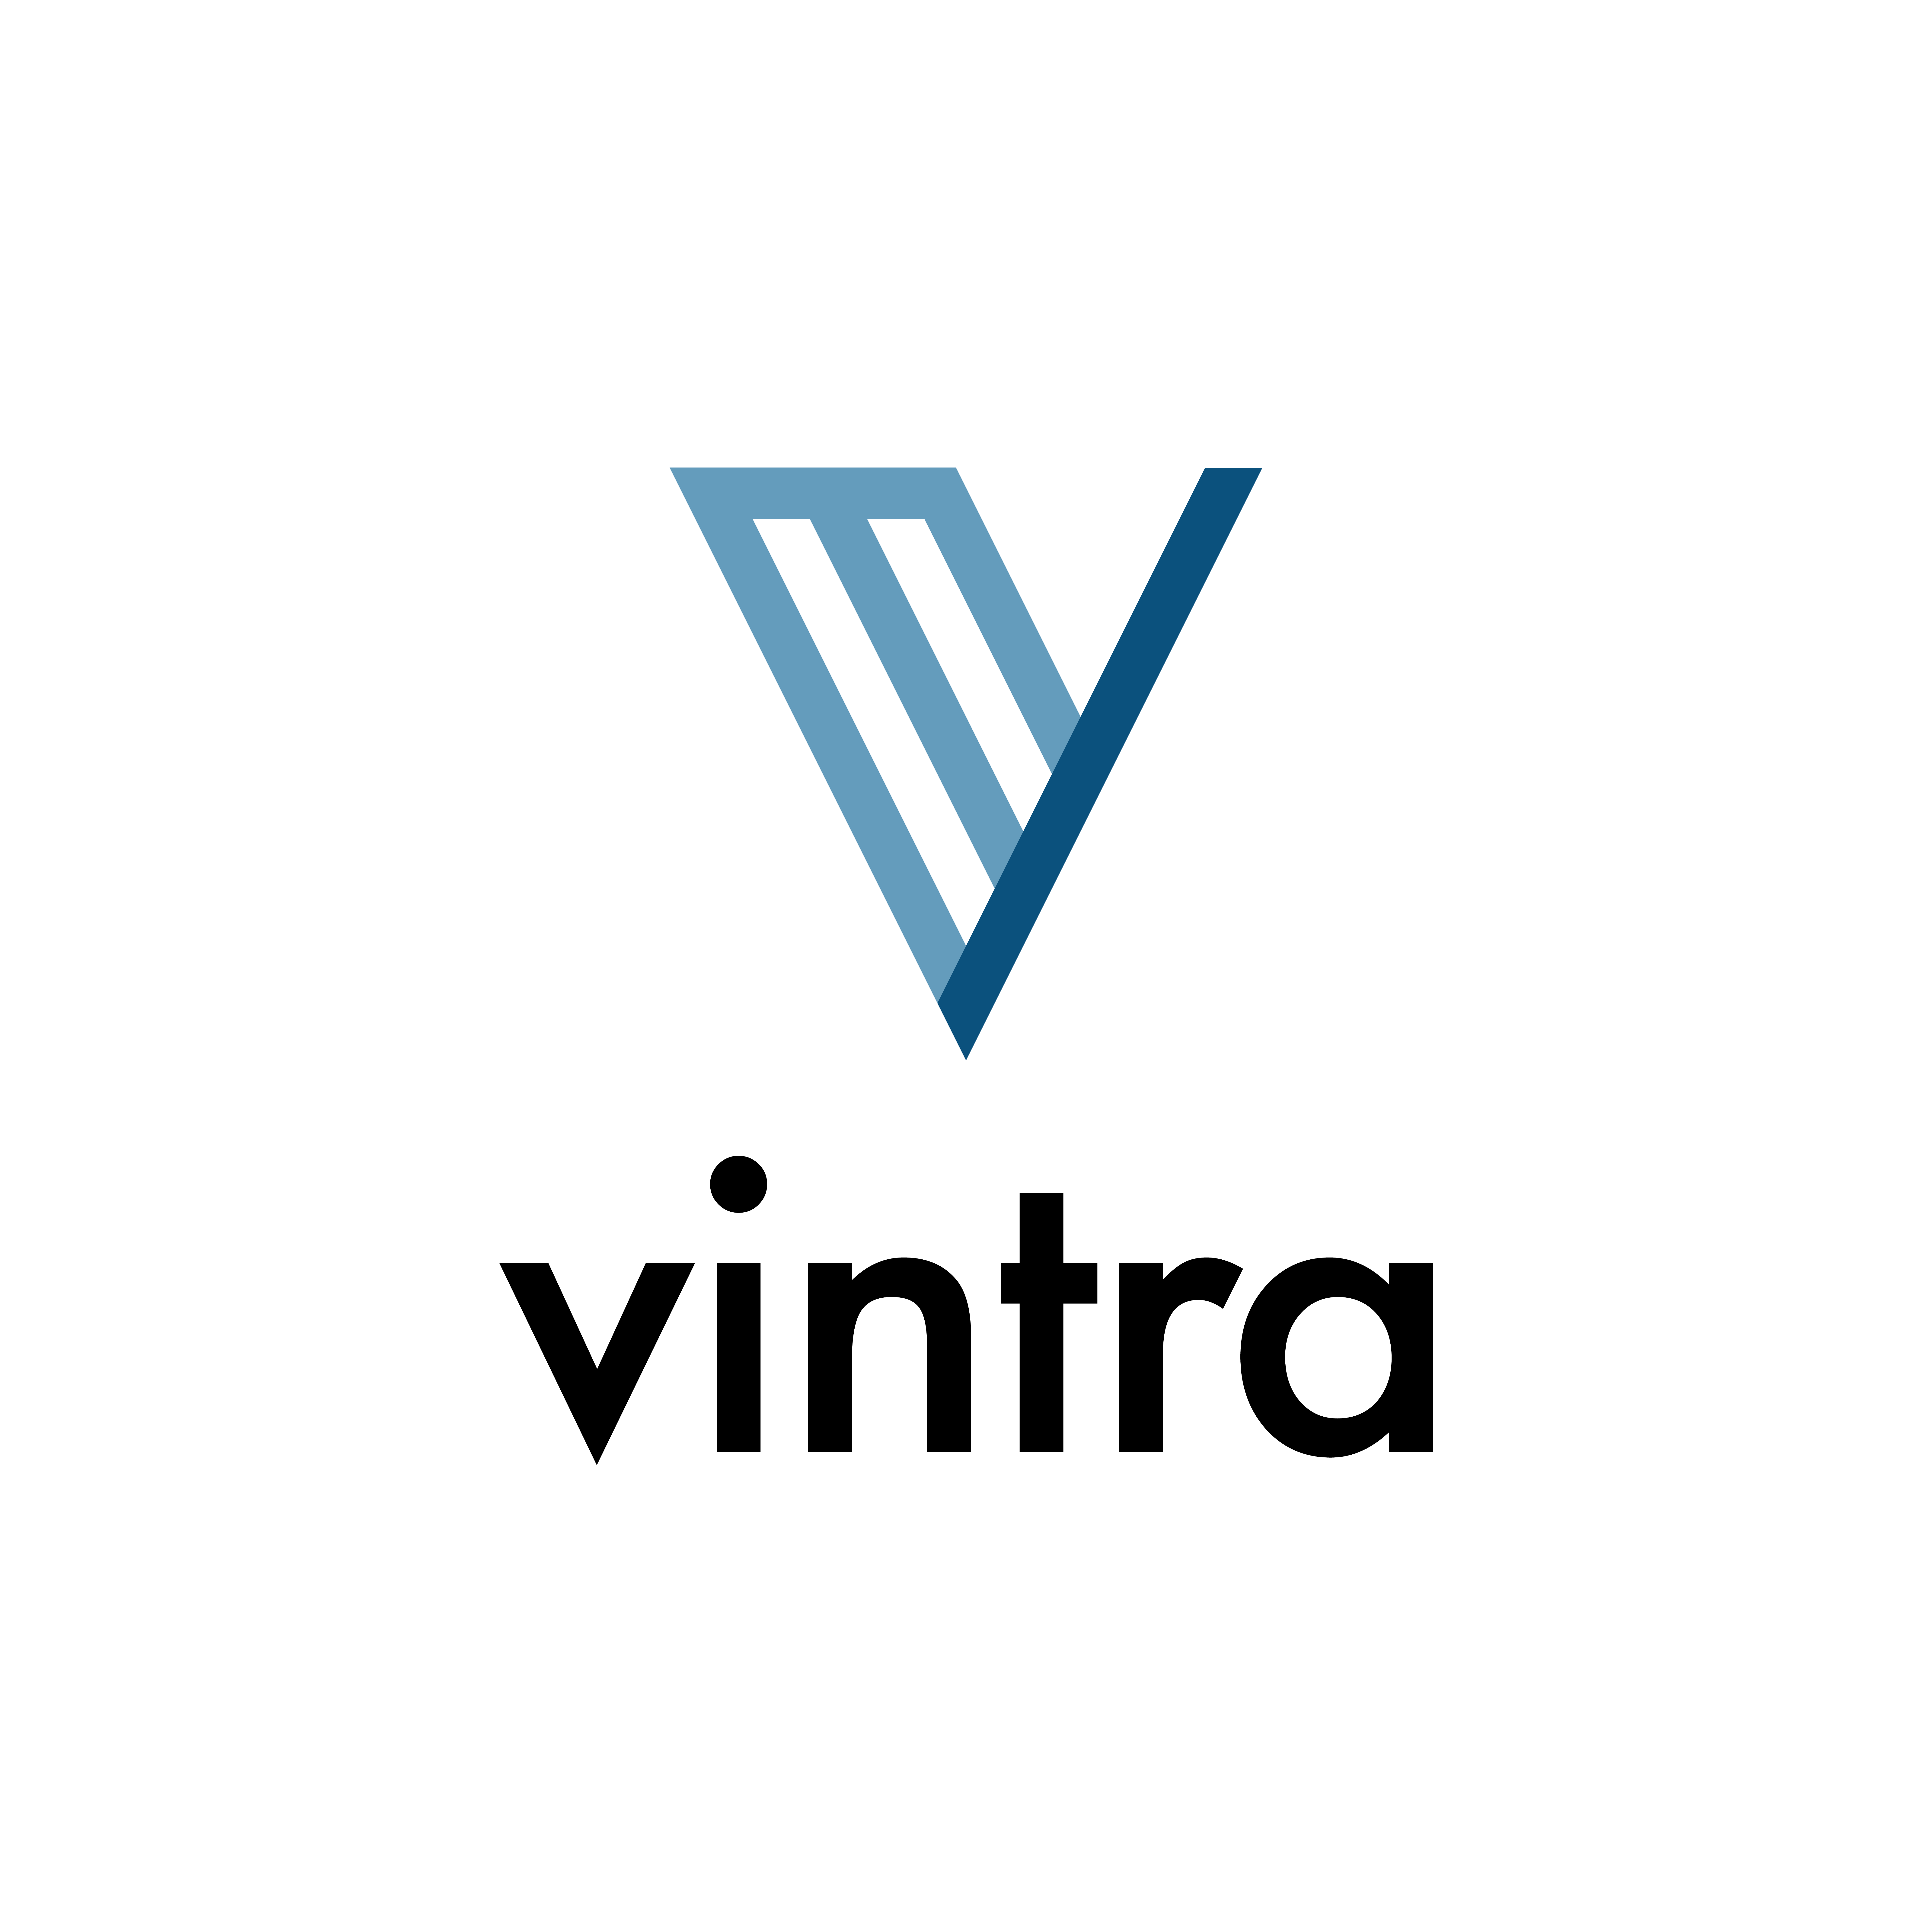 Vintra delivers AI-powered video analytics solutions that transform any real-world video into actionable, tailored and trusted intelligence.